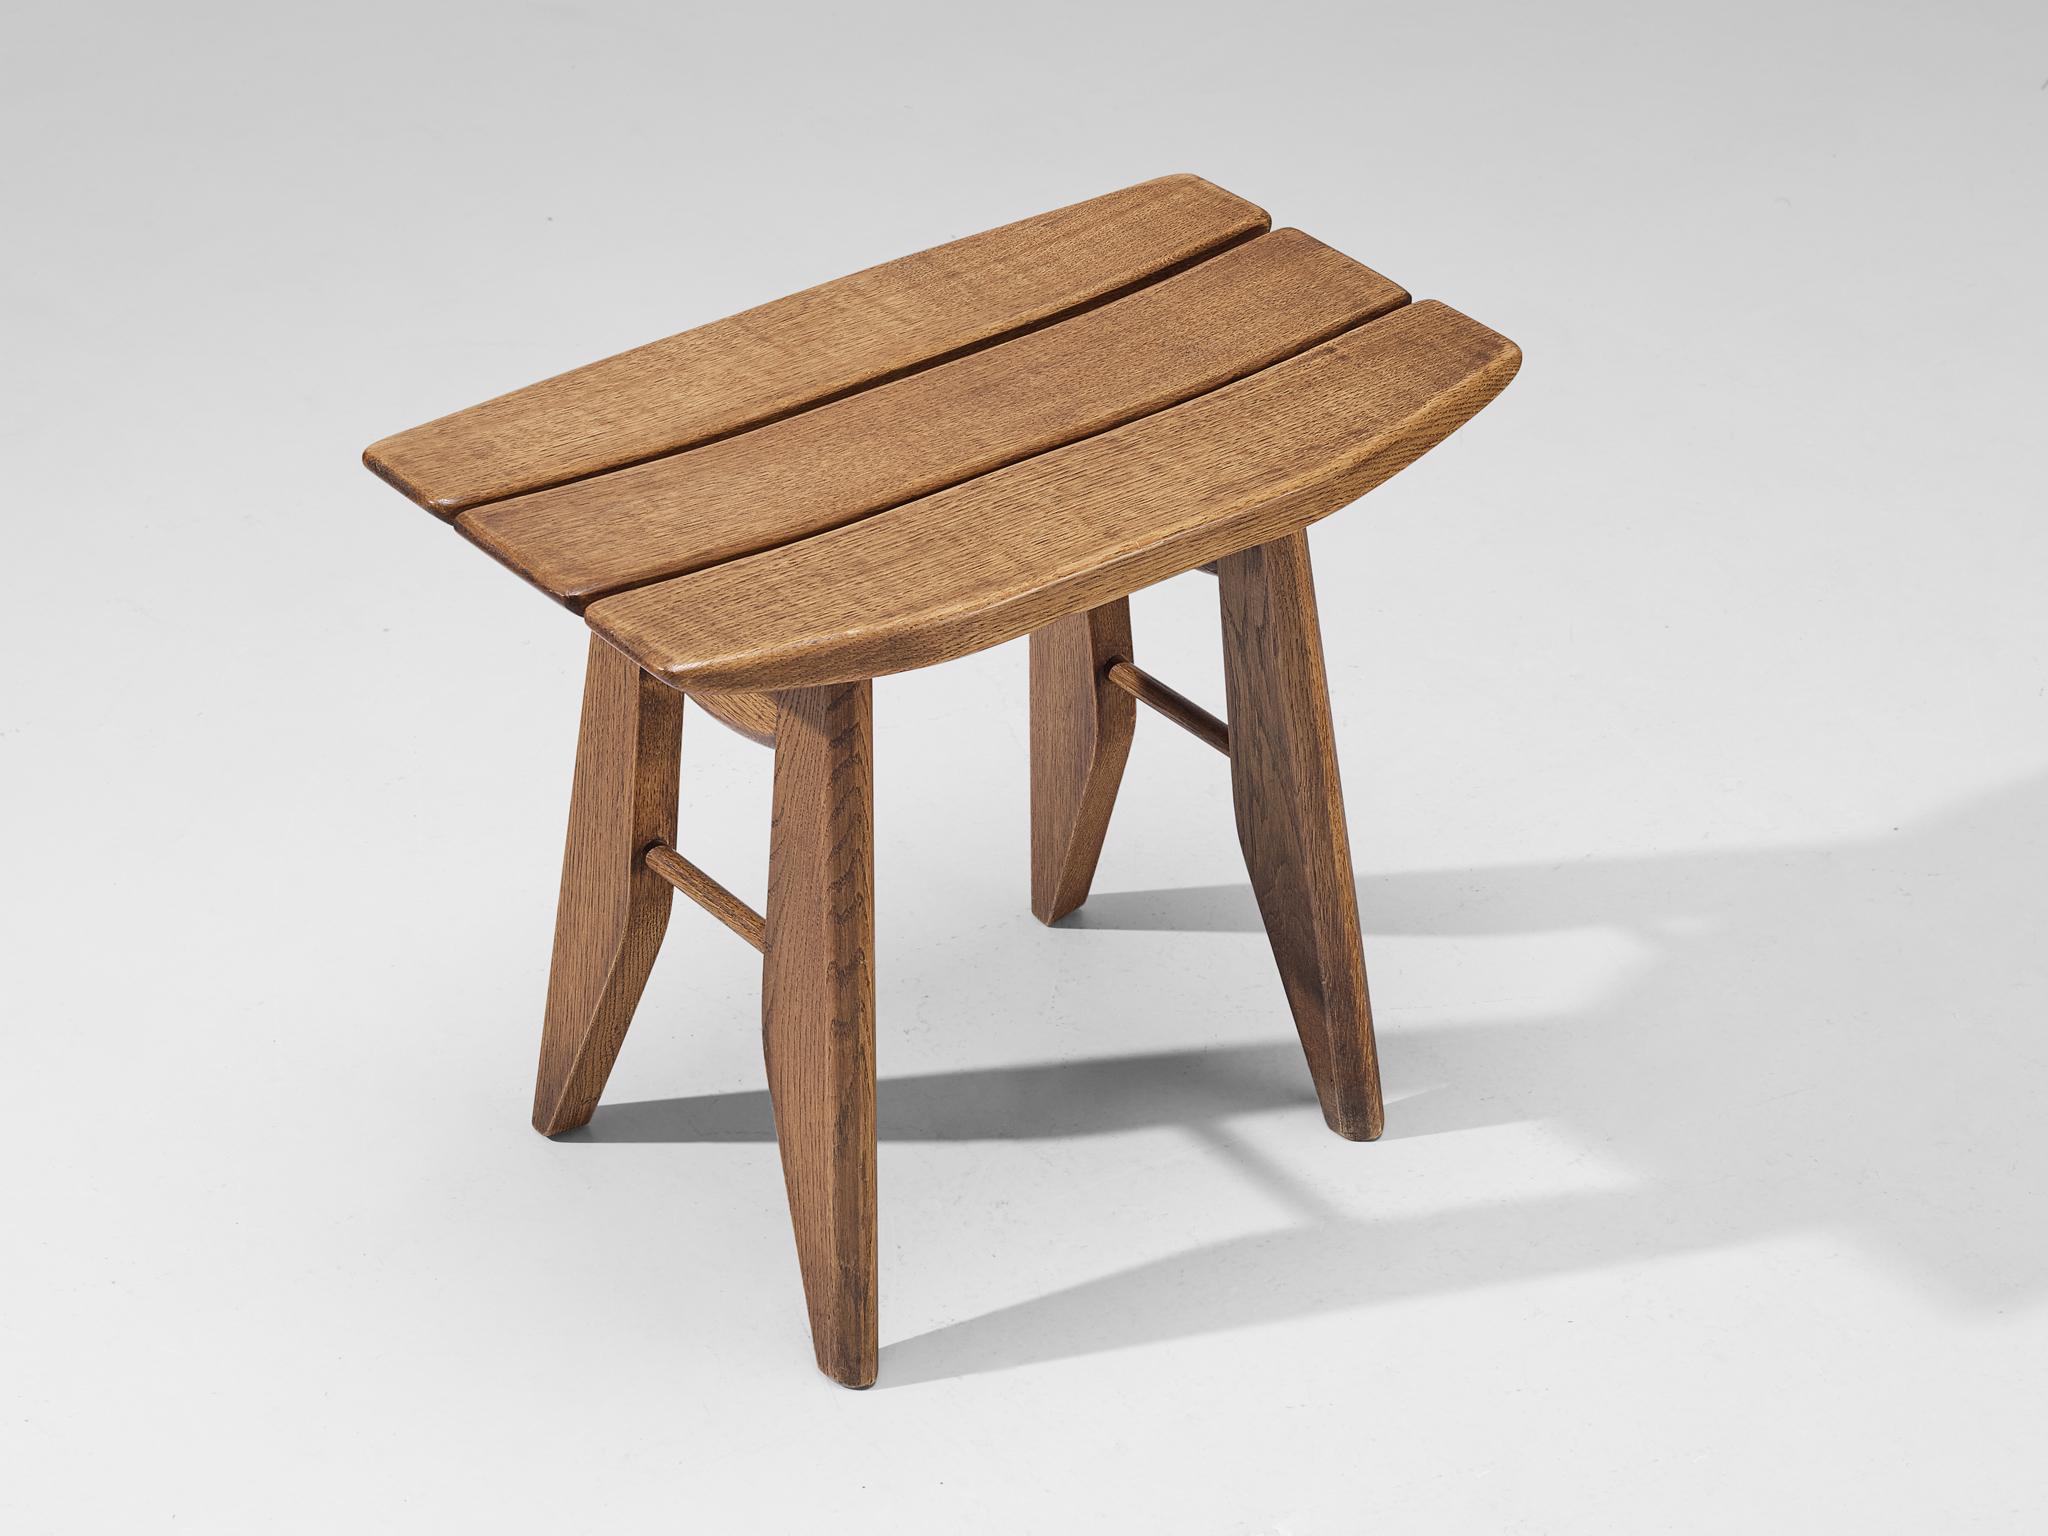 Guillerme et Chambron for Votre Maison, stool, solid oak, France, 1960s.

This oak tabouret, designed by the French duo Guillerme and Chambron, boasts a sculptural form with distinct Japanese influences. The seat is composed of three slats, with